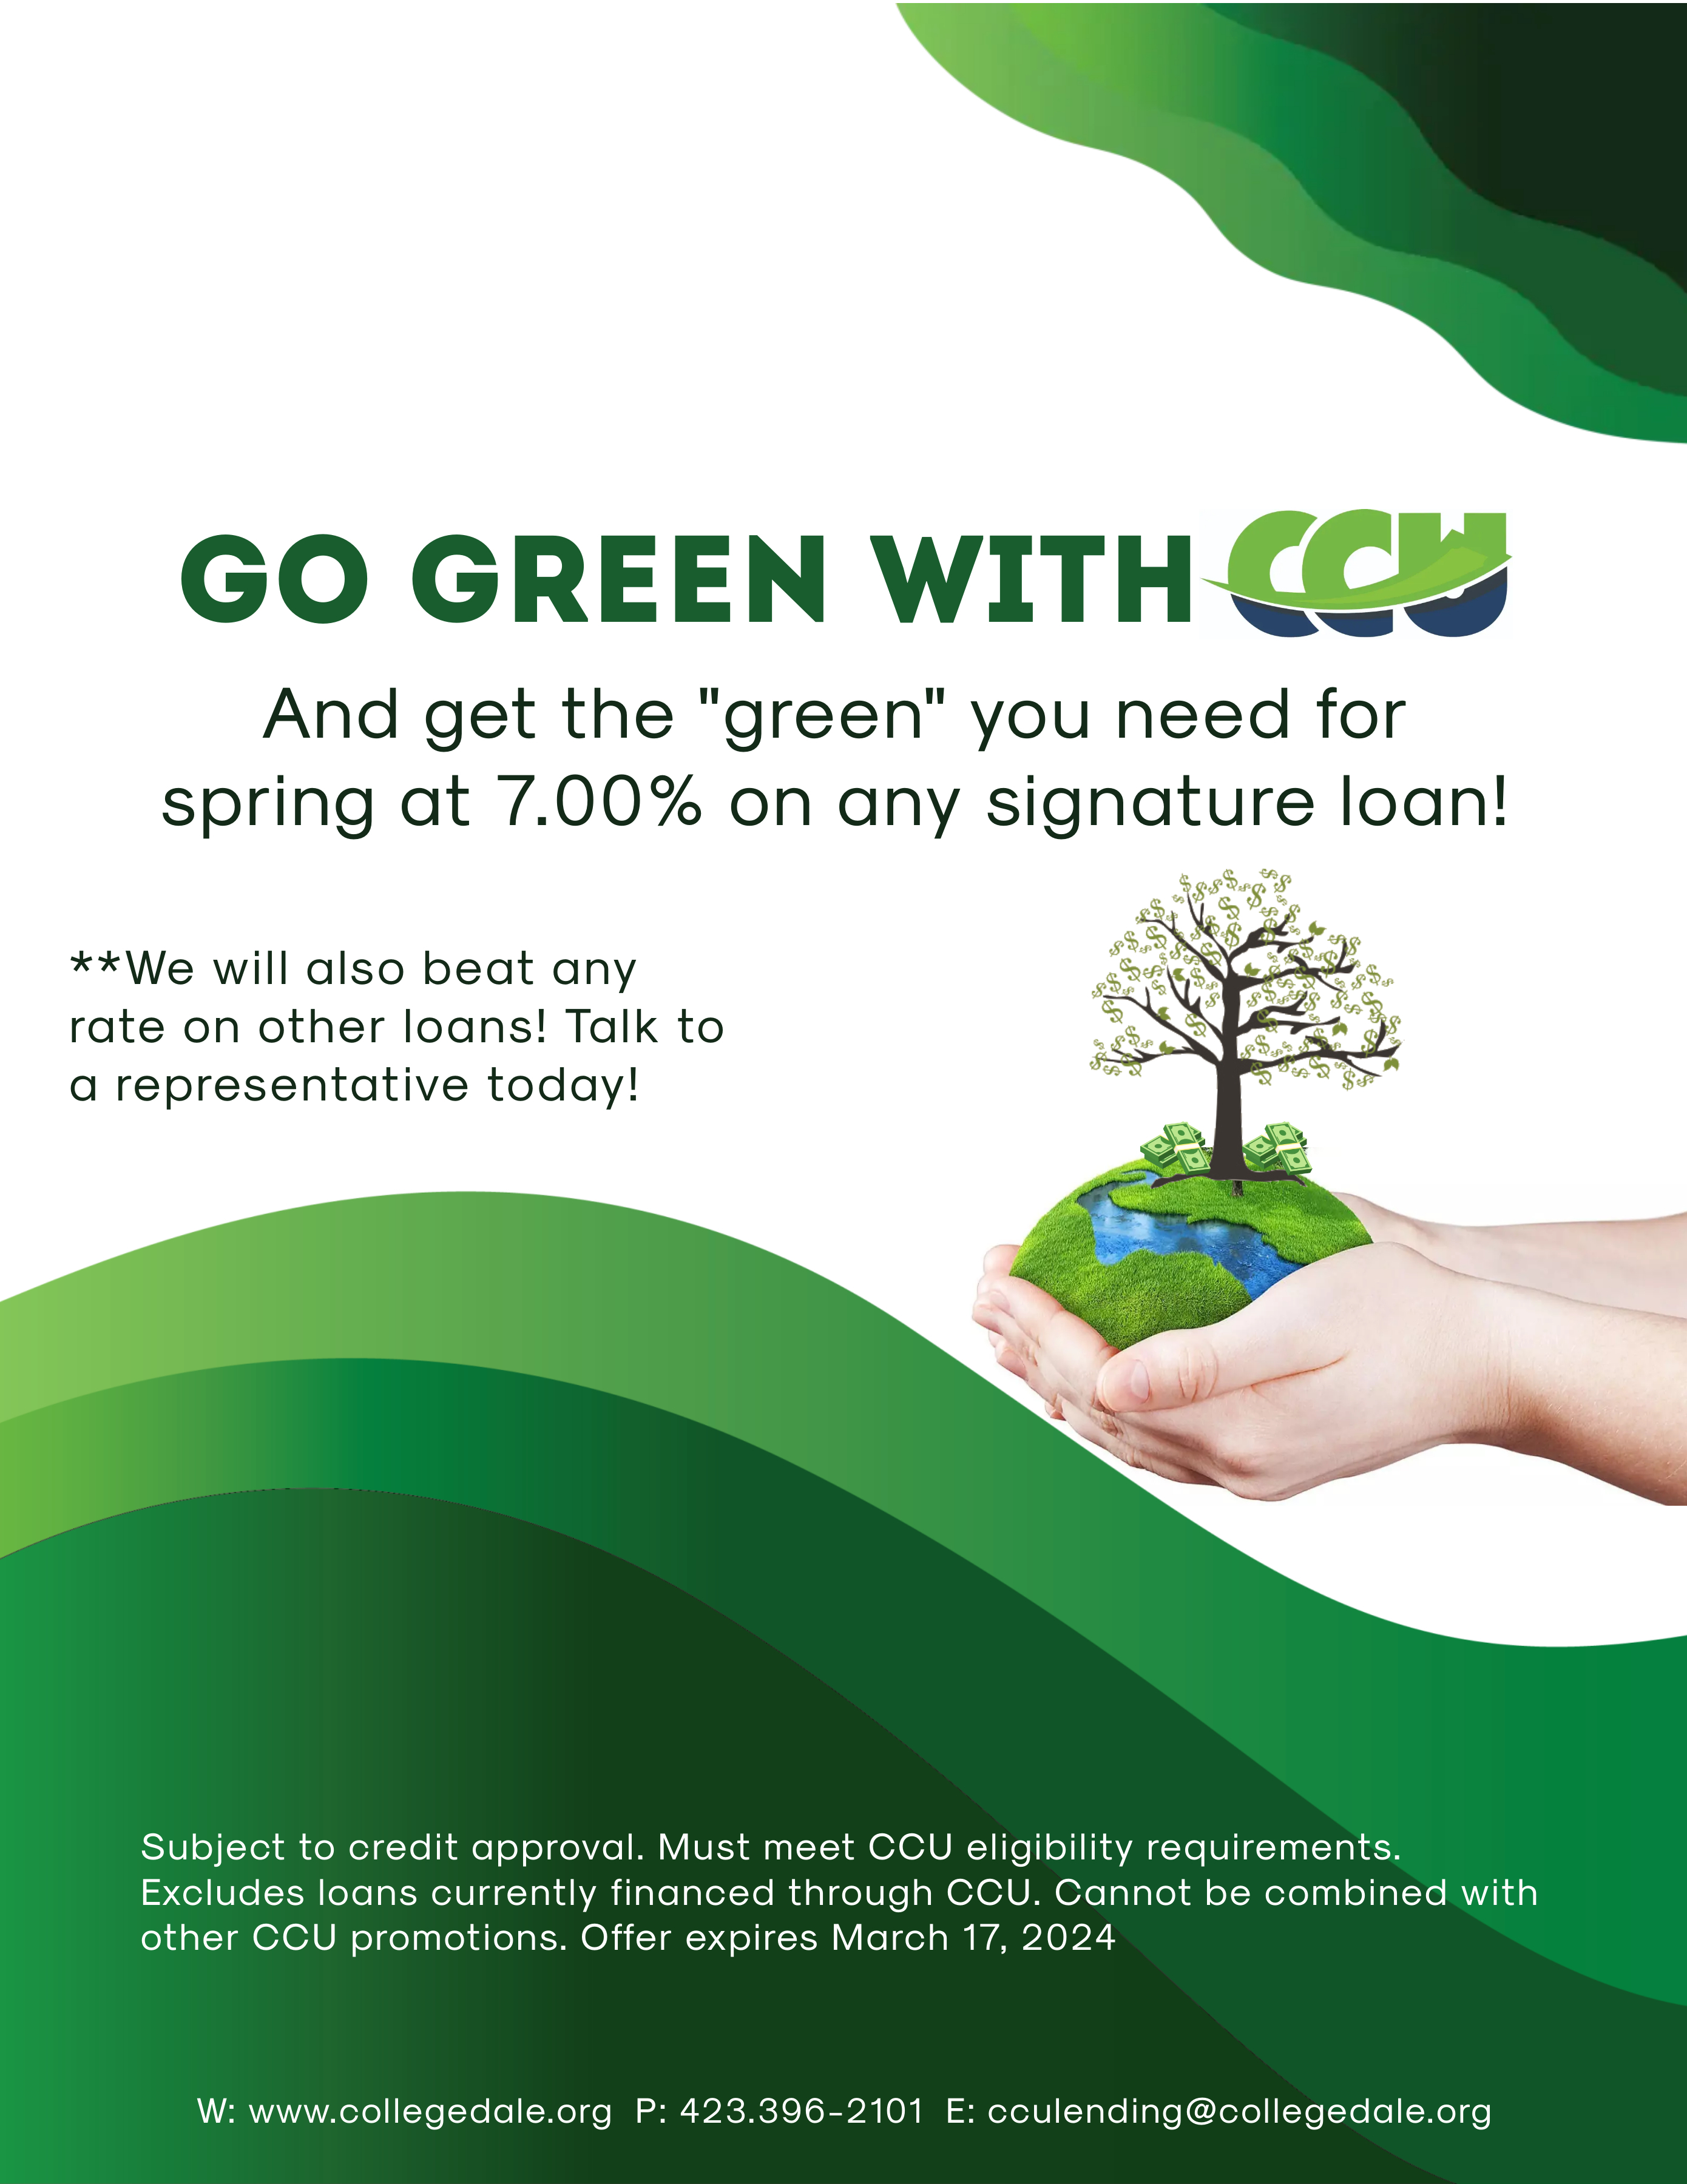 Go Green with CCU.  And get the "green" you need for spring at 7.00% on any signature loan!  **We will also beat any rate on other loans! Talk to a representative today!  Image shows a pair of hands holding a piece of land that has a tree, creek and grass.  